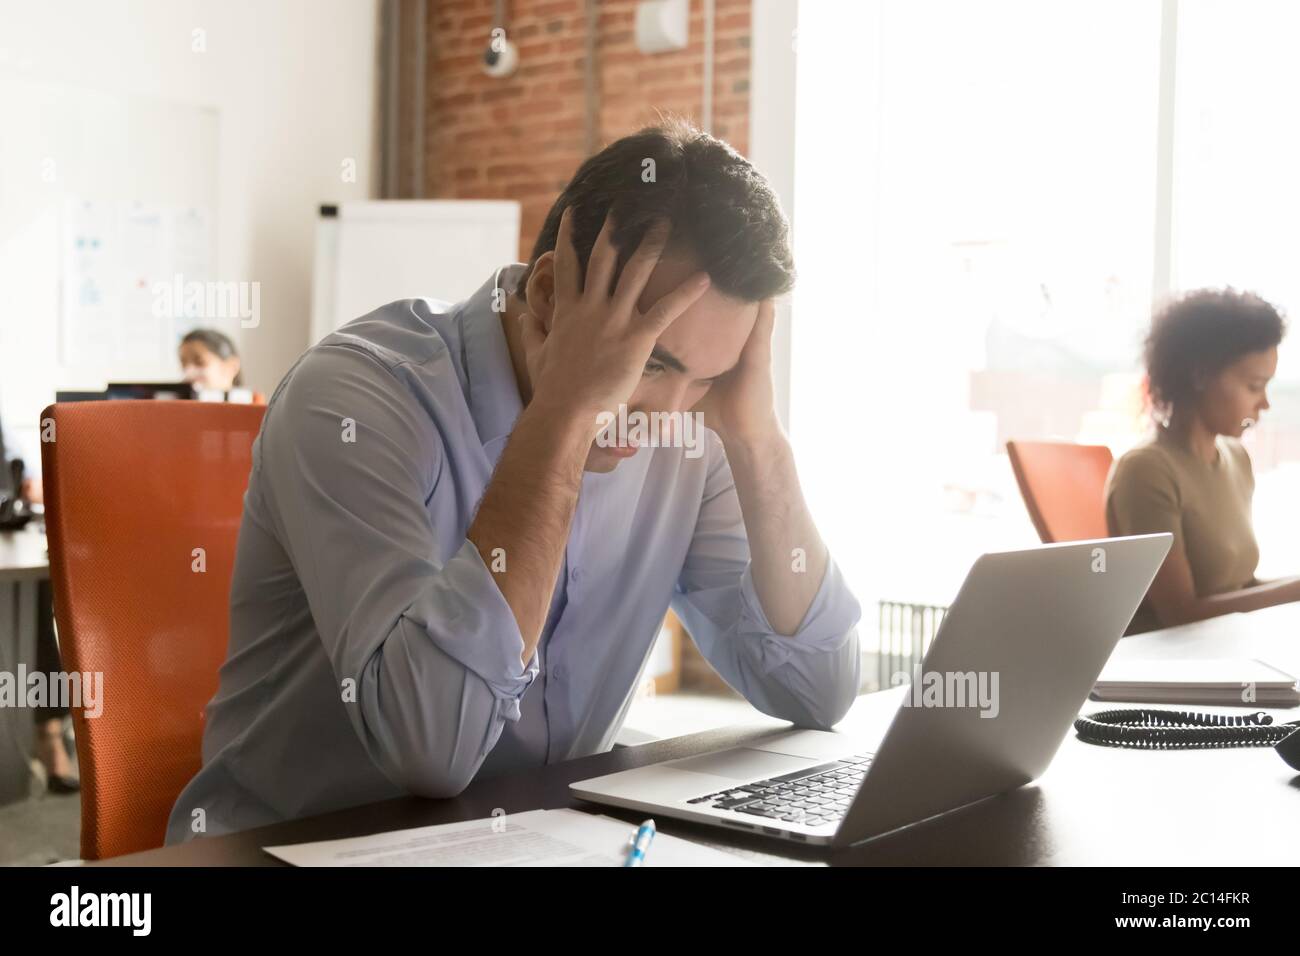 Unhappy businessman employee receive bad news, holding head in hands Stock Photo